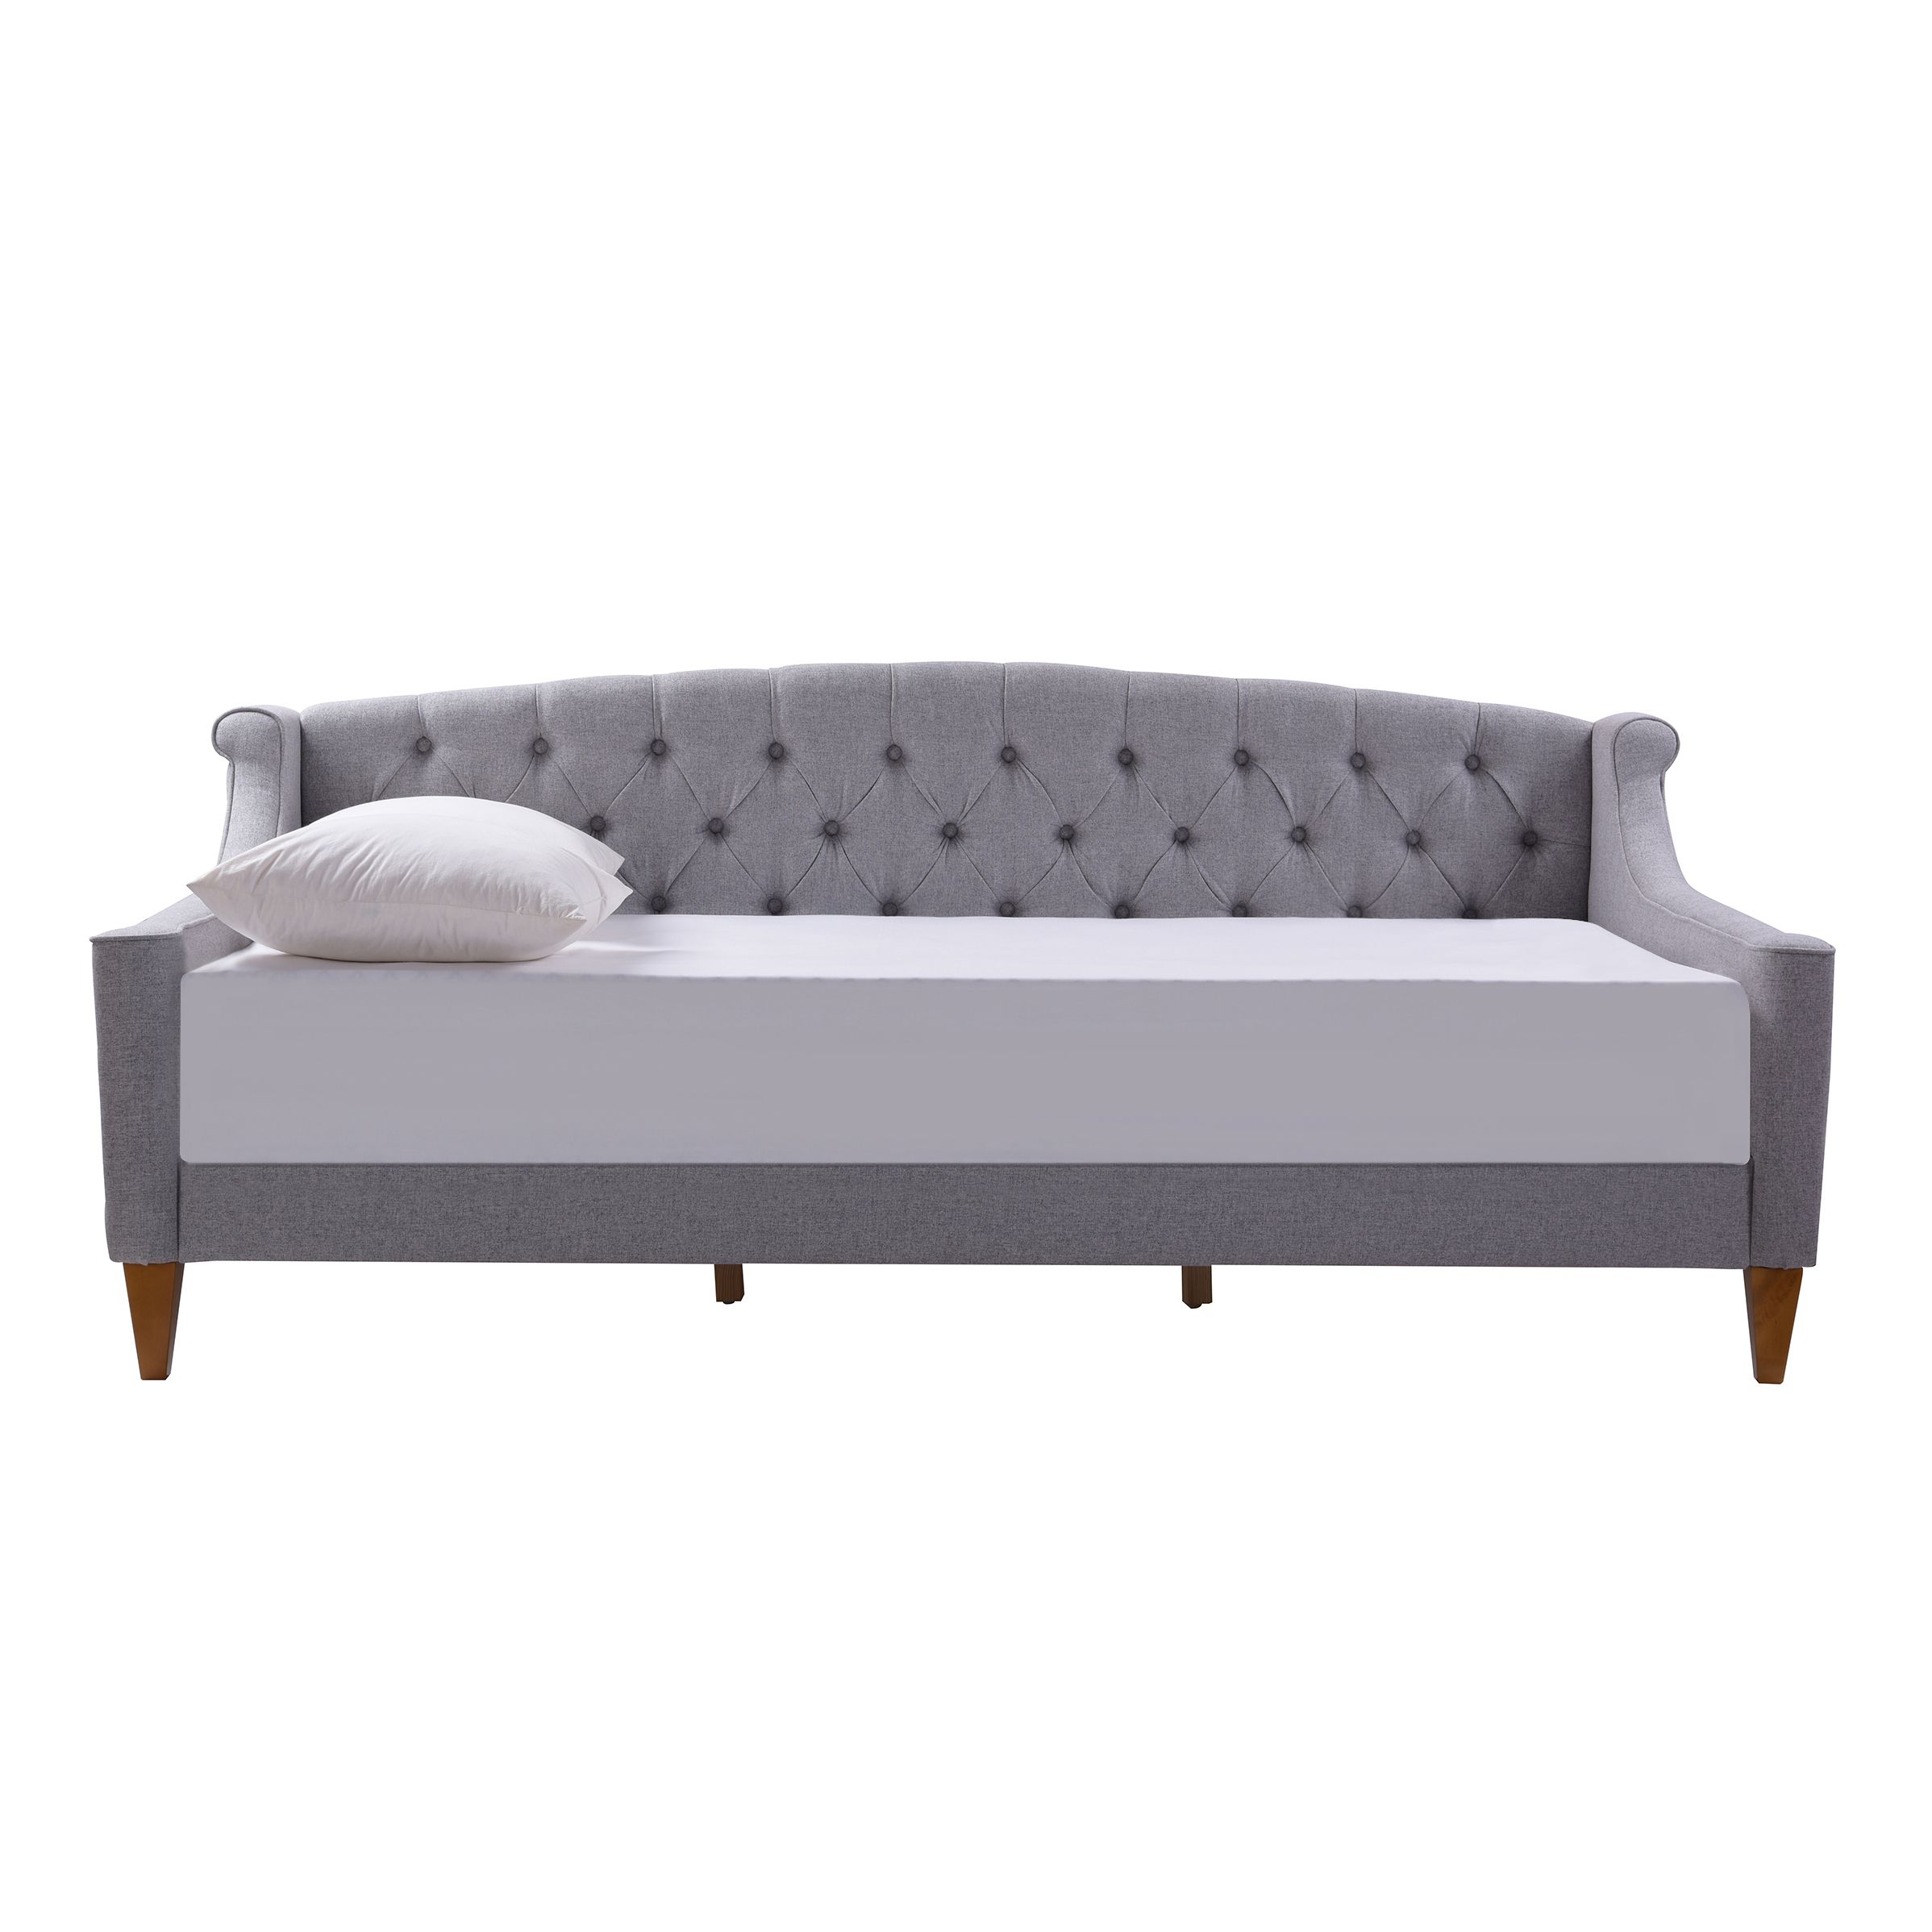 Lucy Sofa Bed, Light Grey 运盛家用饰品（杭州）有限公司 Intended For Lucy Grey Sofa Chairs (View 11 of 25)